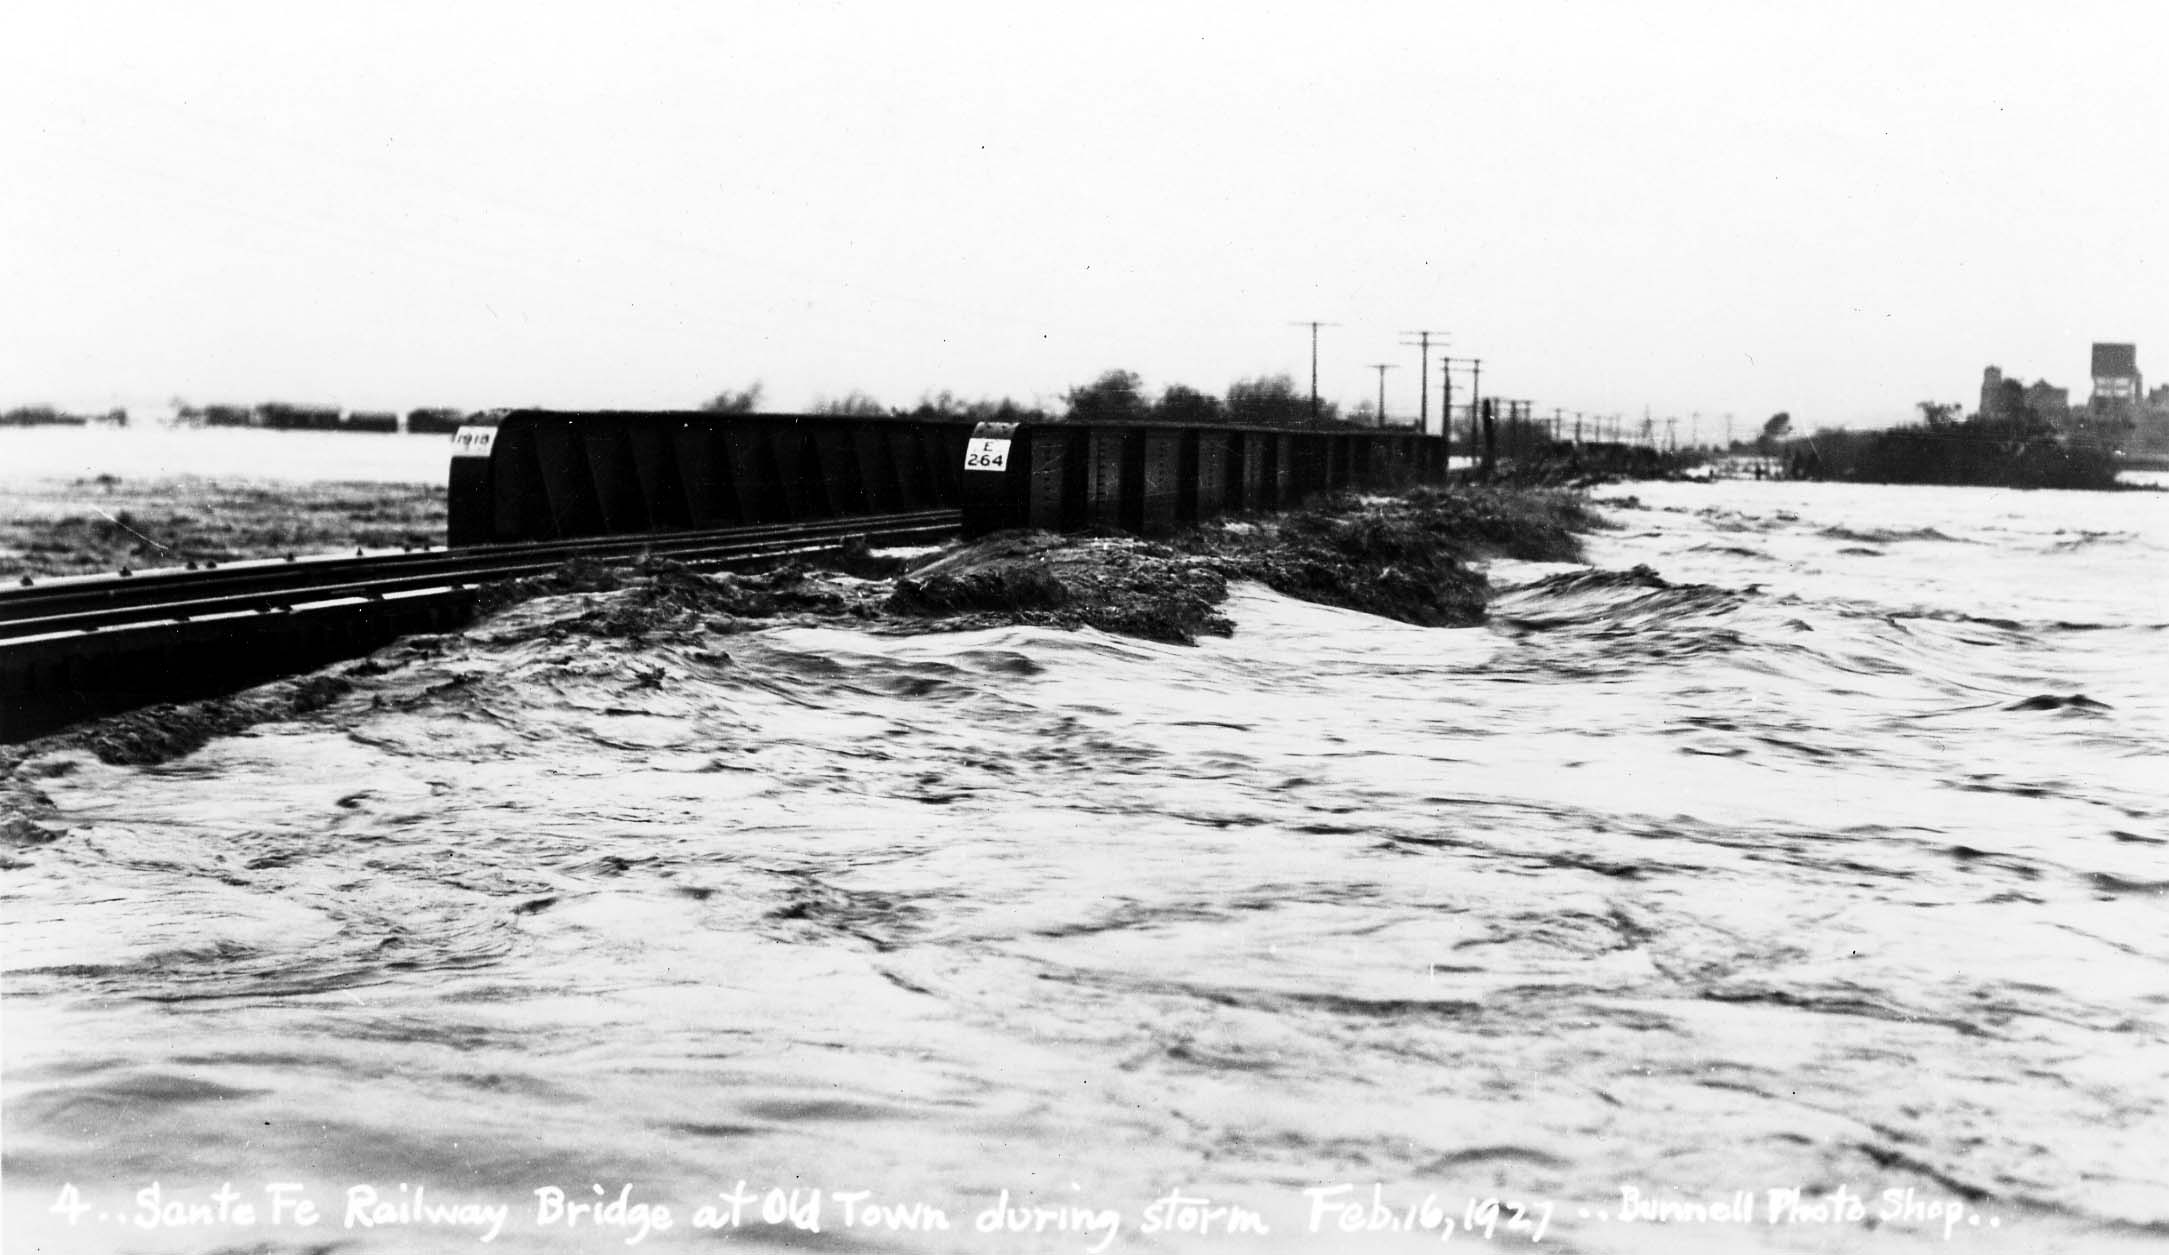 A vintage black and white photograph of flooding in San Diego, California on February, 16th 1927 before the city built flood controls to prevent the airfield and parts of the city from being submerged. This is why young pilot Charles Lindbergh had to reach the the city via an alternative route.